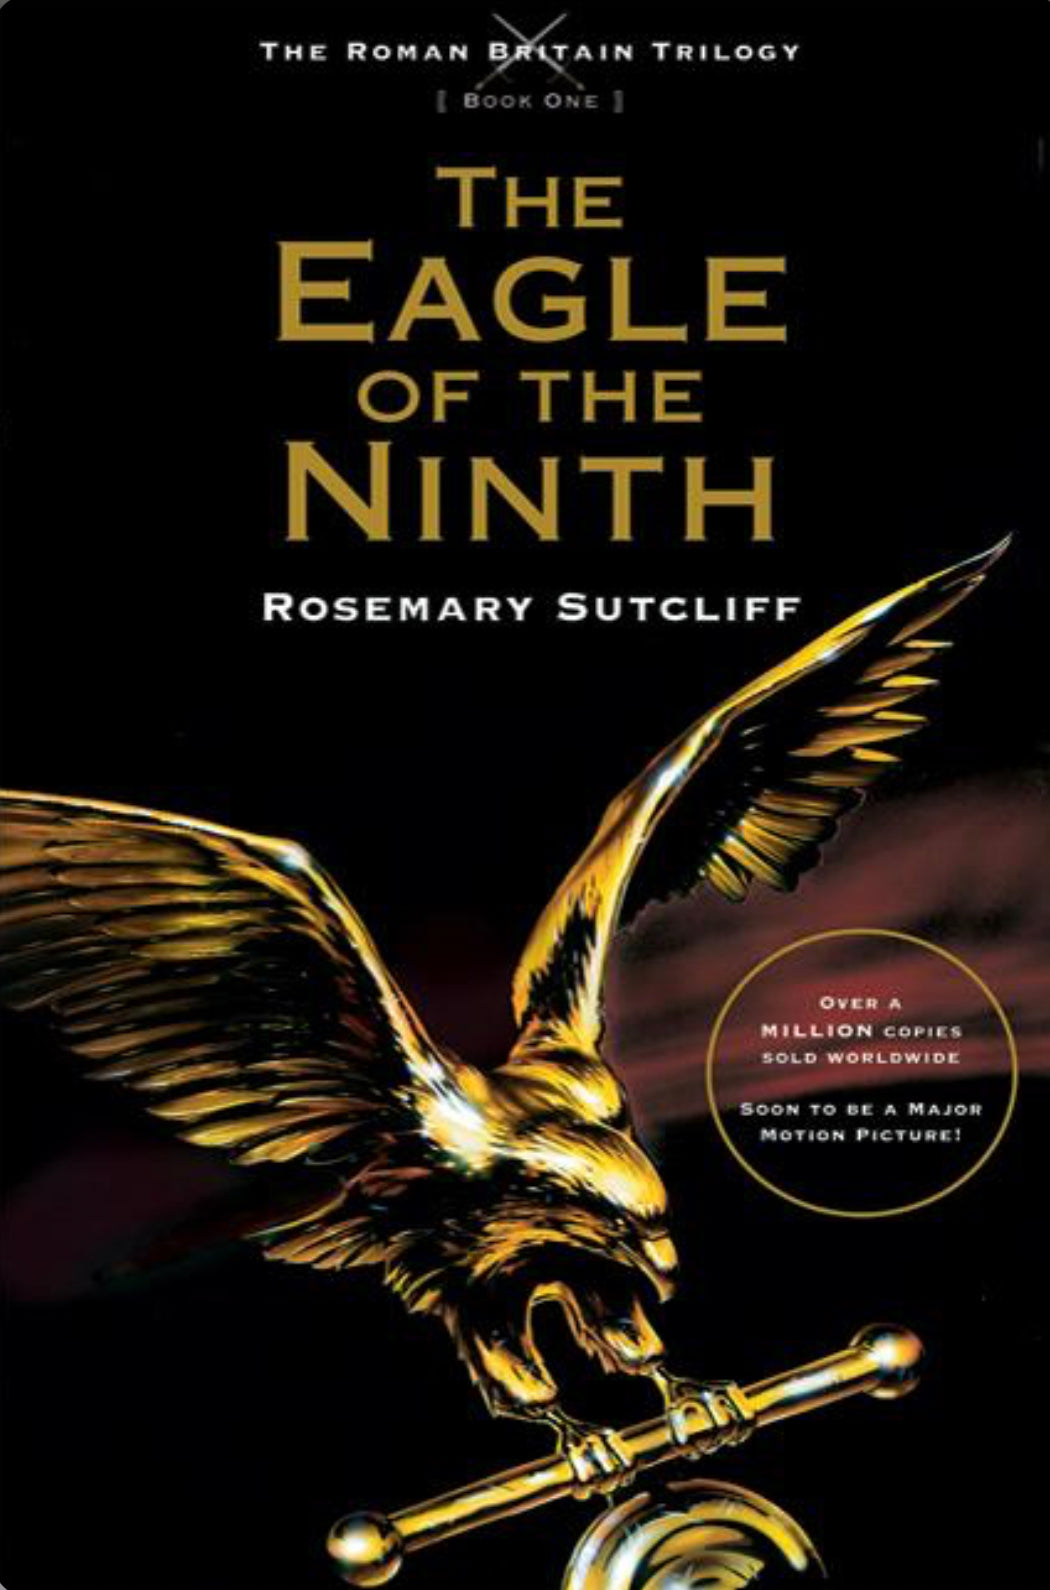 The Eagle of the Ninth, Rosemary Sutcliff | Book 1, The Roman Britain Trilogy - Alder & Alouette